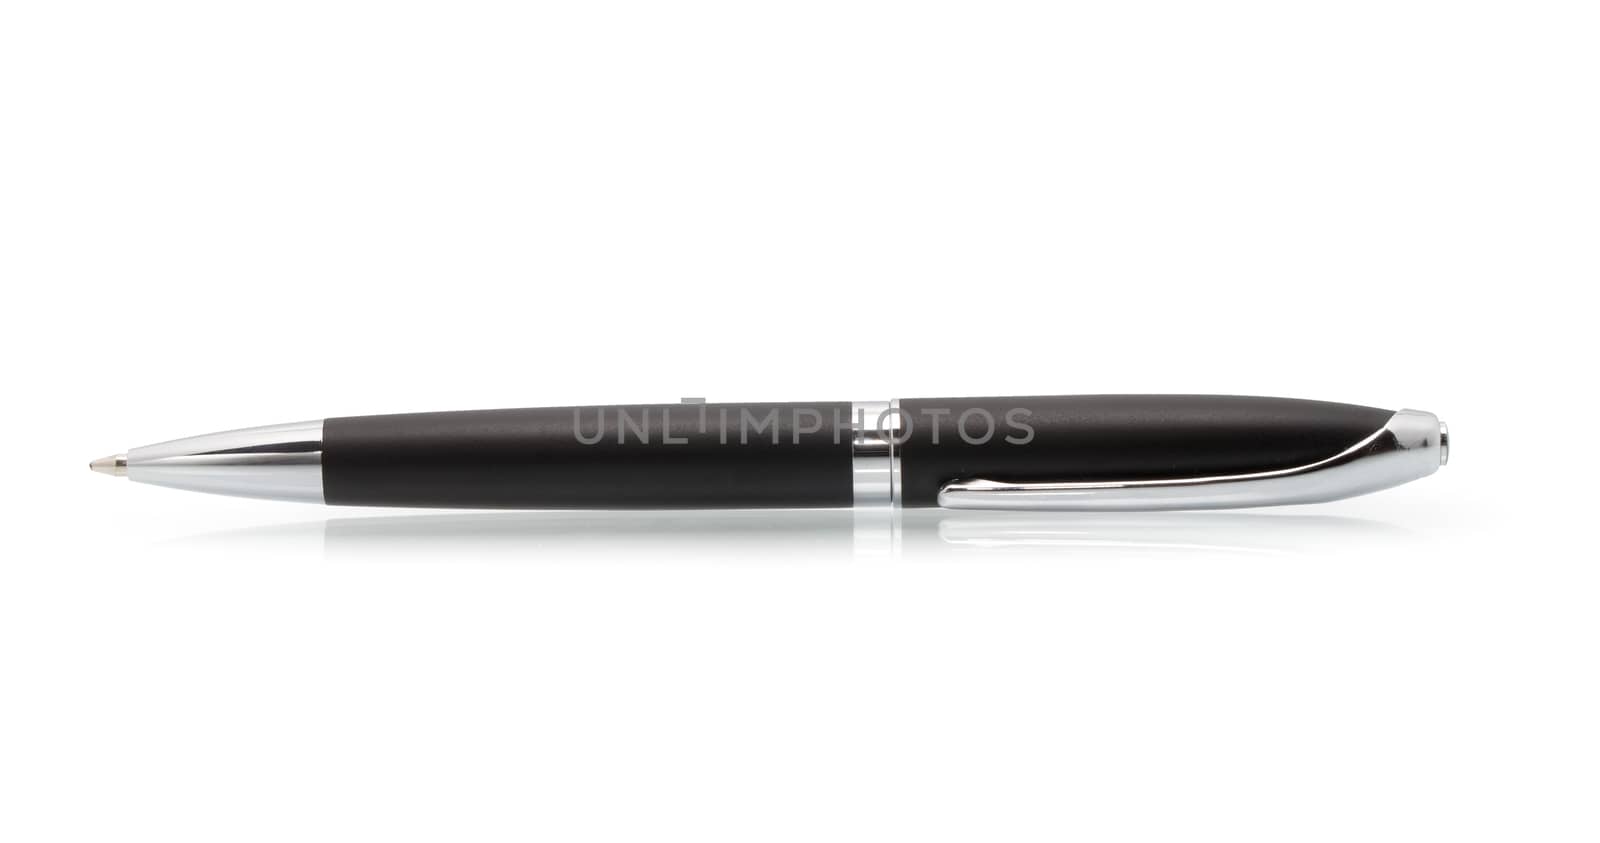 metal pen isolated on white background